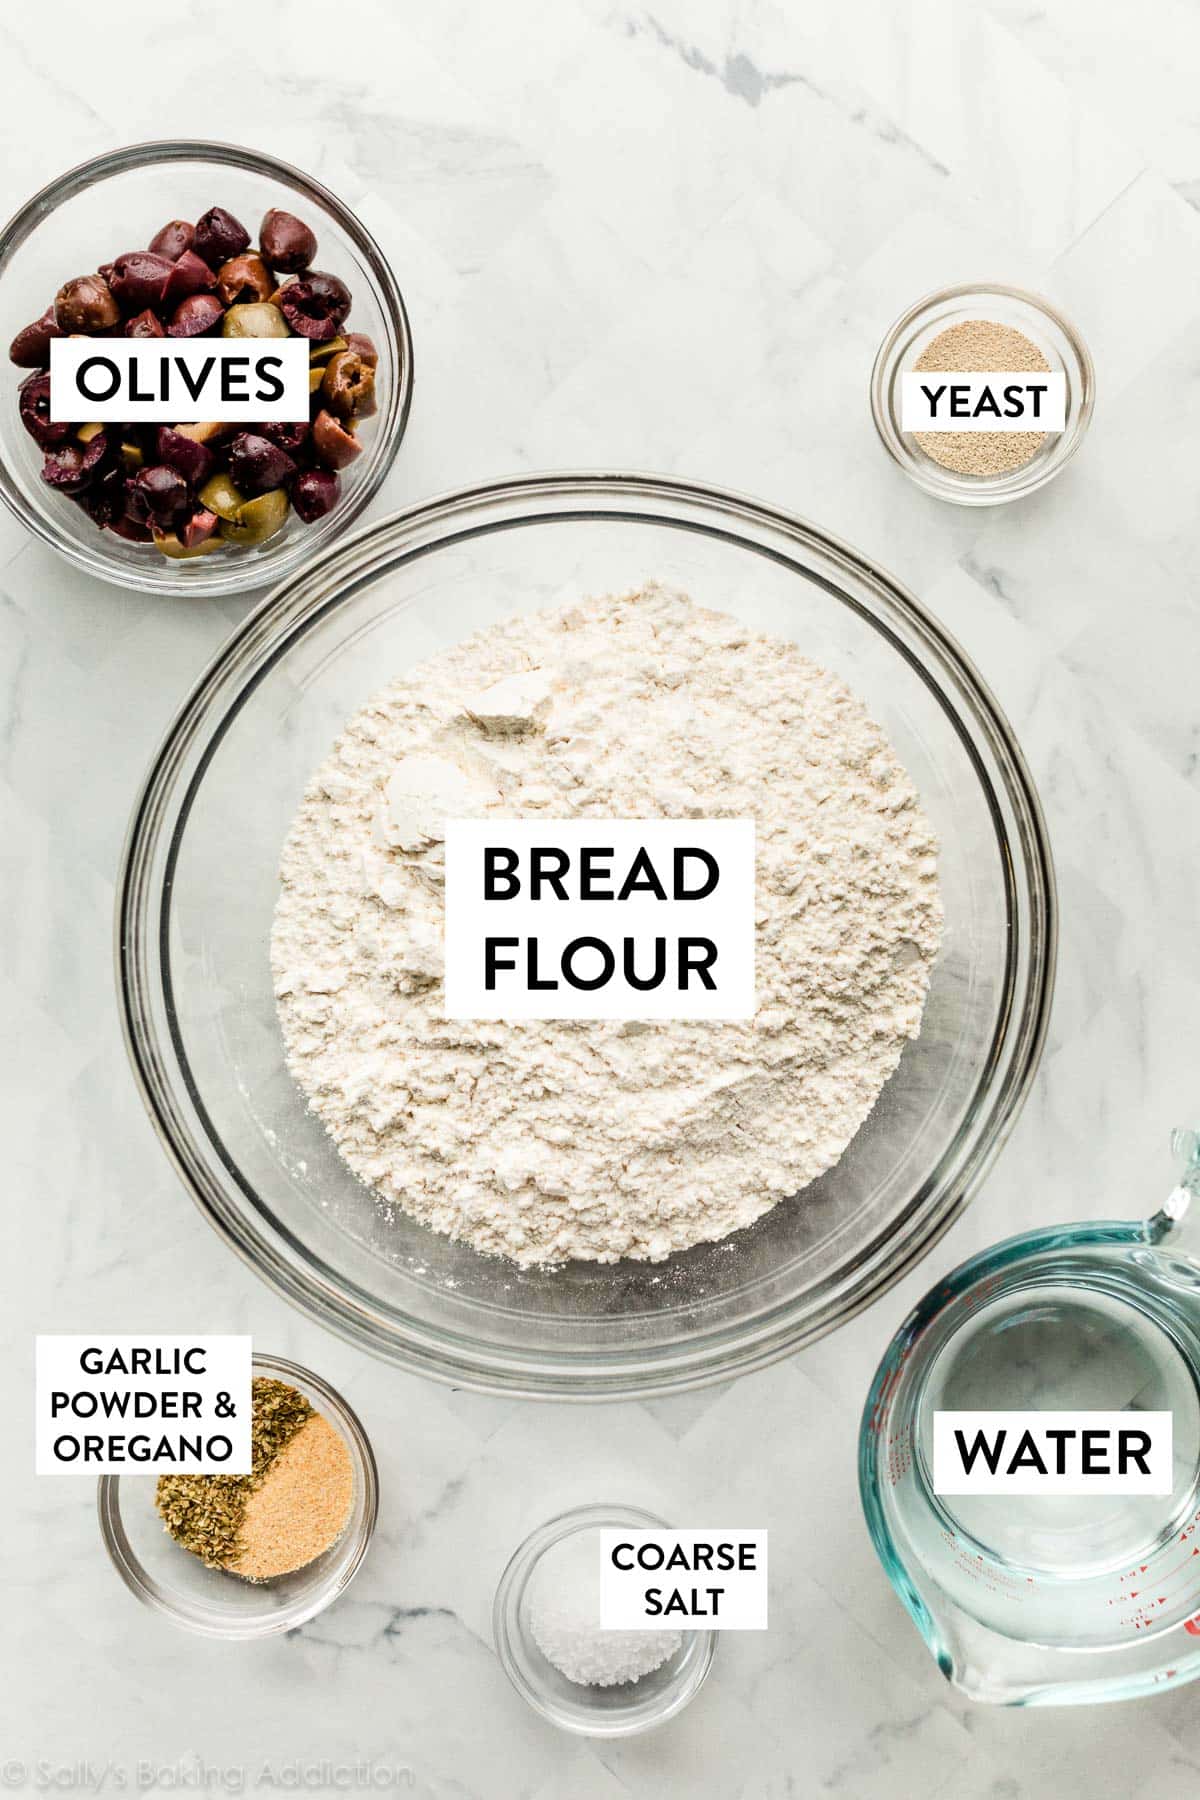 ingredients in bowls including bread flour, olives, yeast, water, coarse salt, garlic powder, and dried oregano